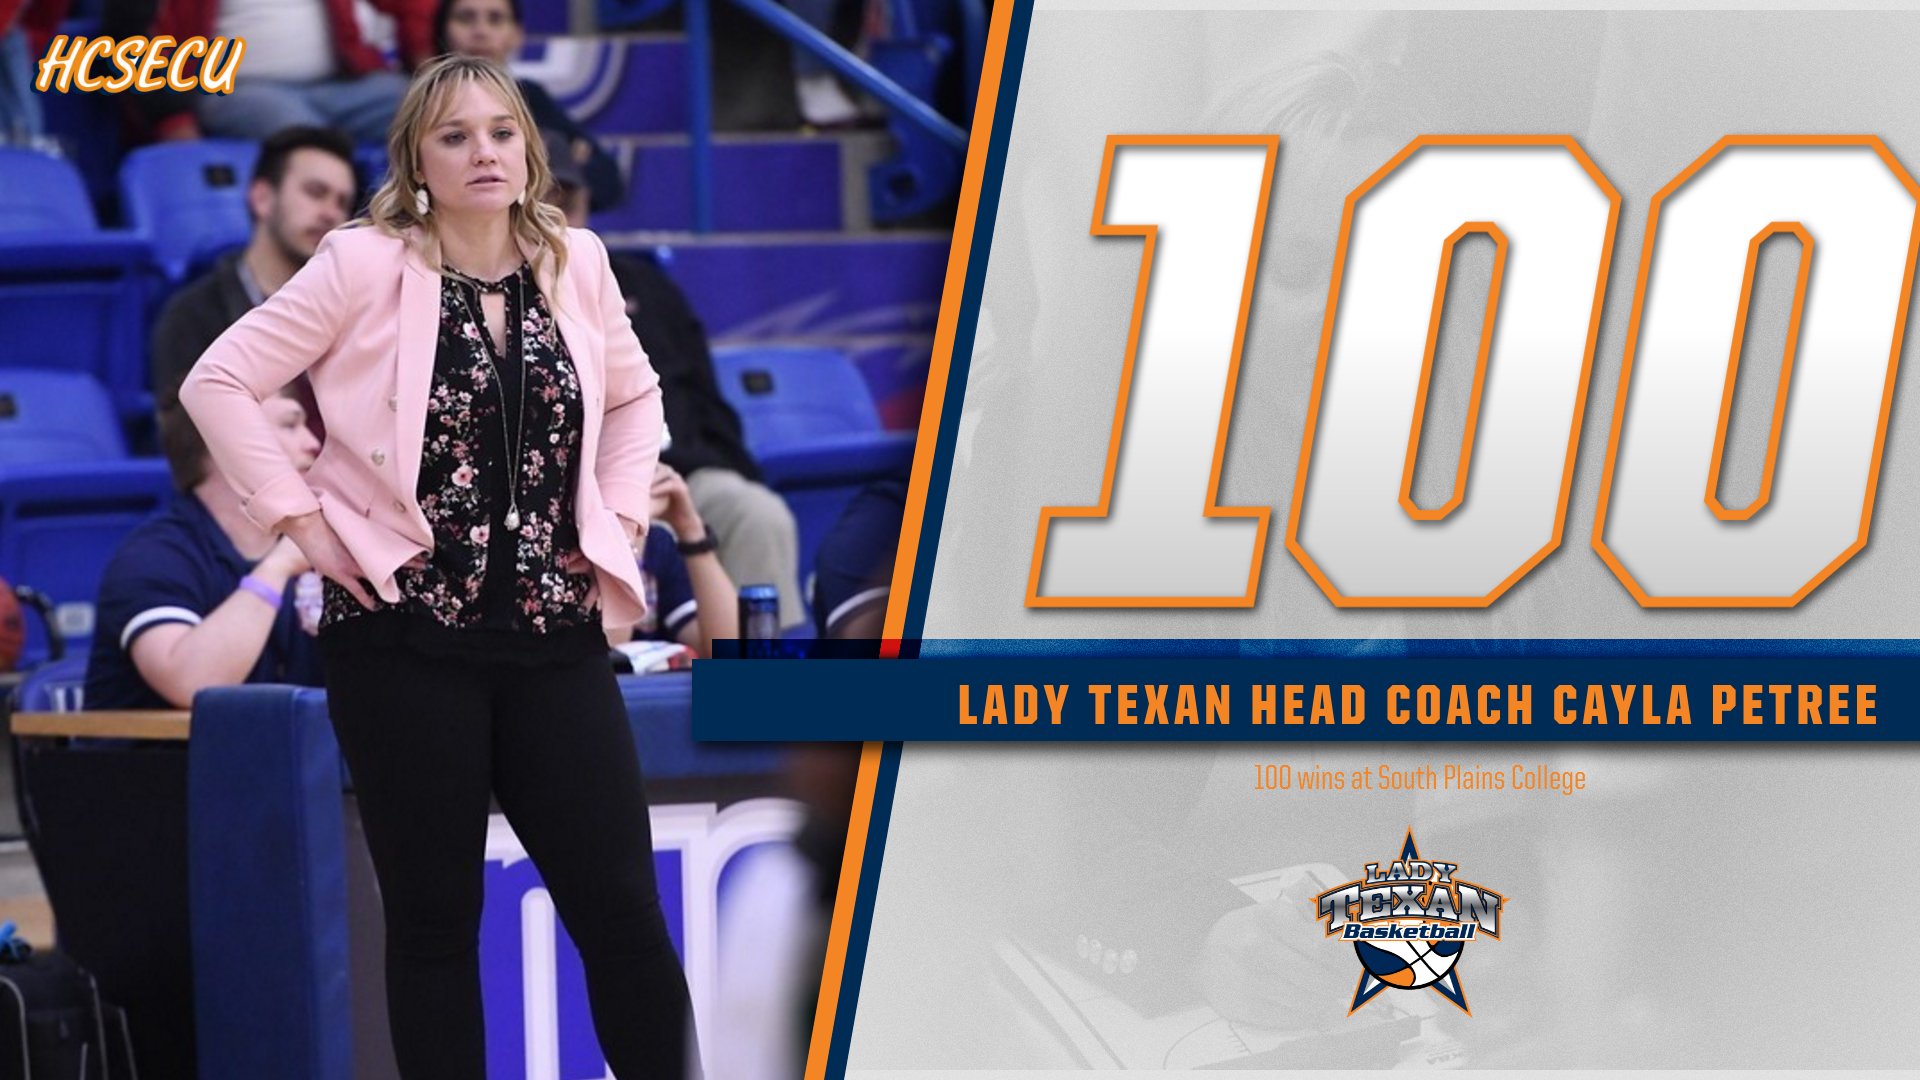 Petree gets win number 100 as No. 2 Lady Texans trounce No. 13 Salt Lake 77-35